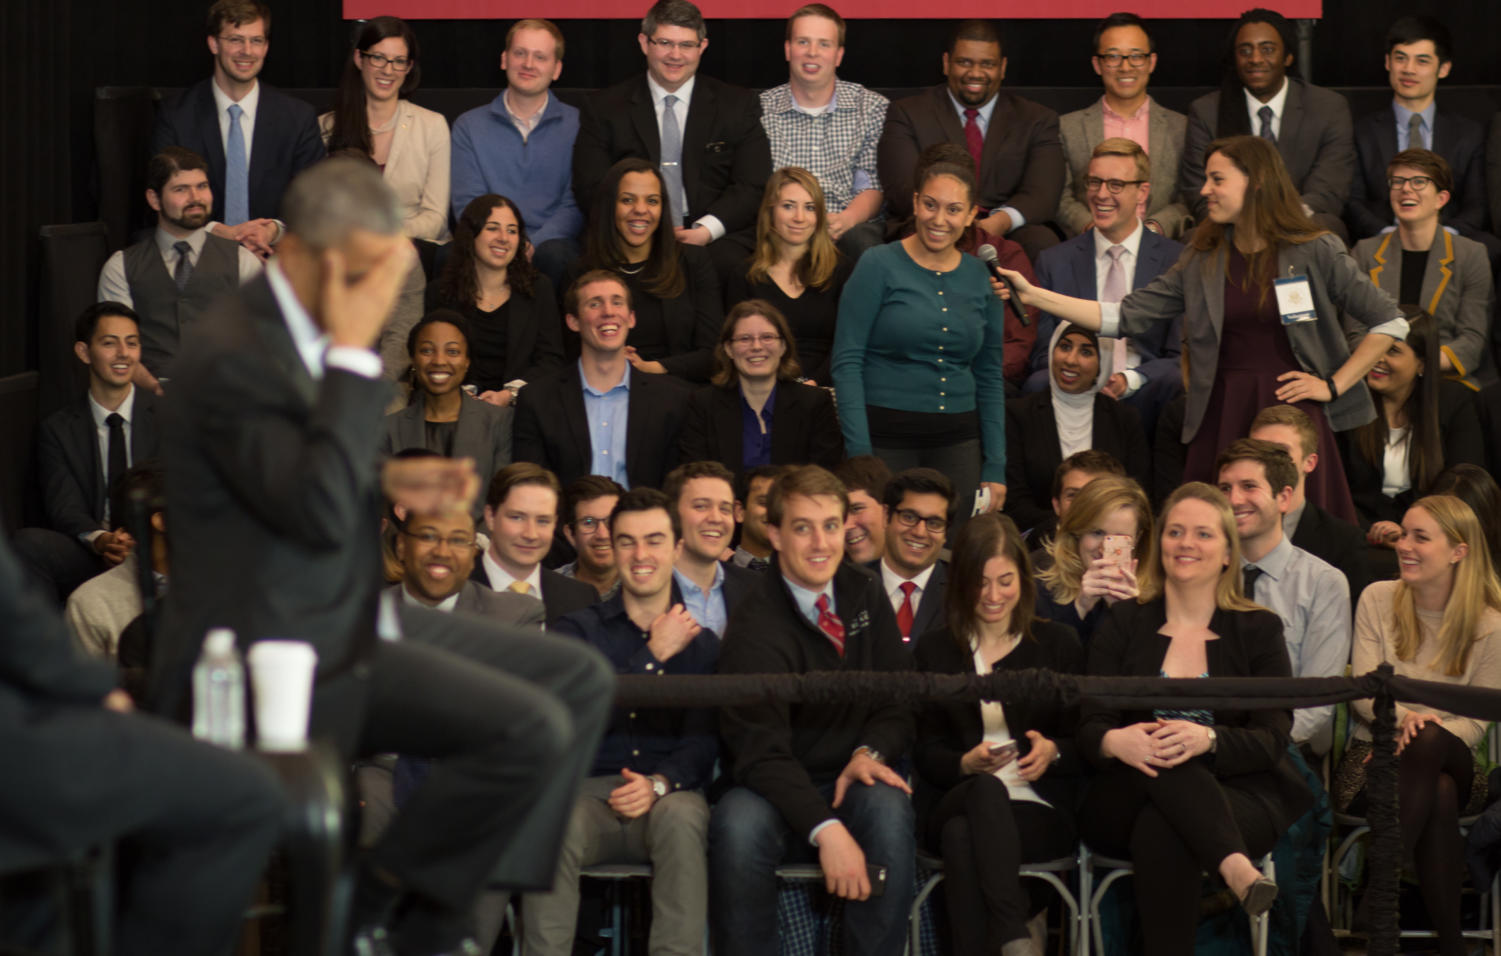 President Obama jokes with a Law School student who asked him a question.